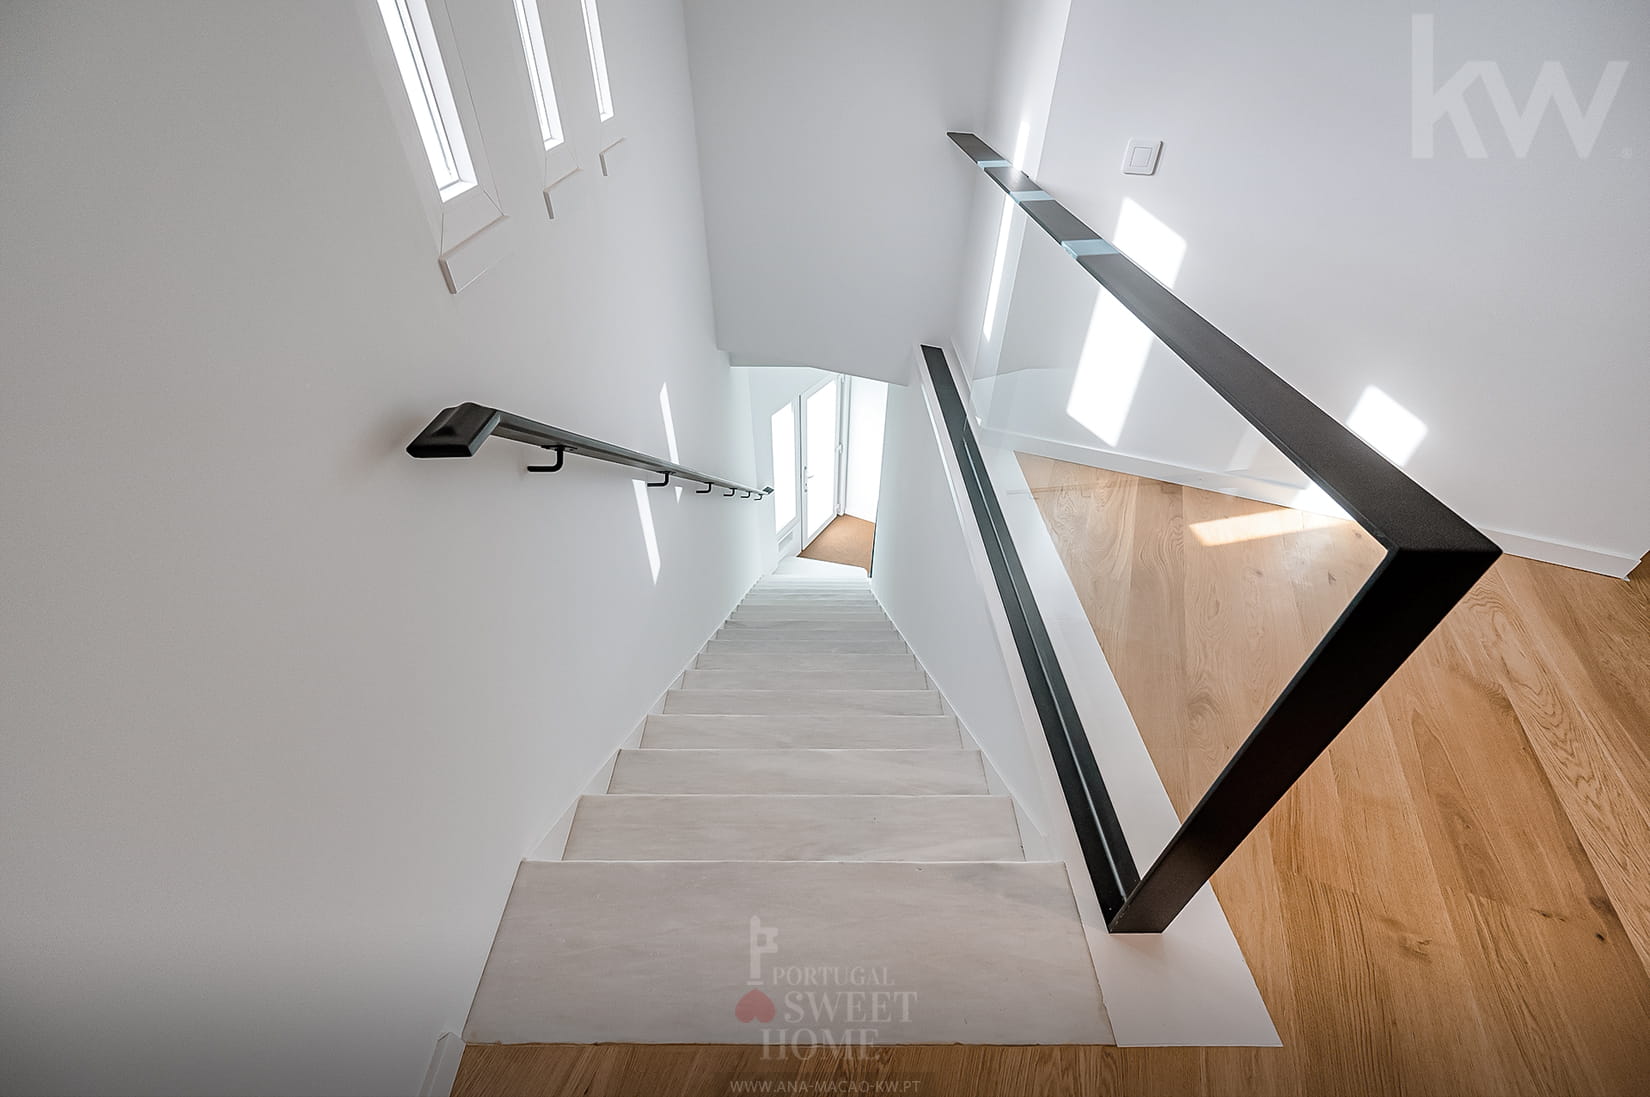 Stairs leading to floor 0